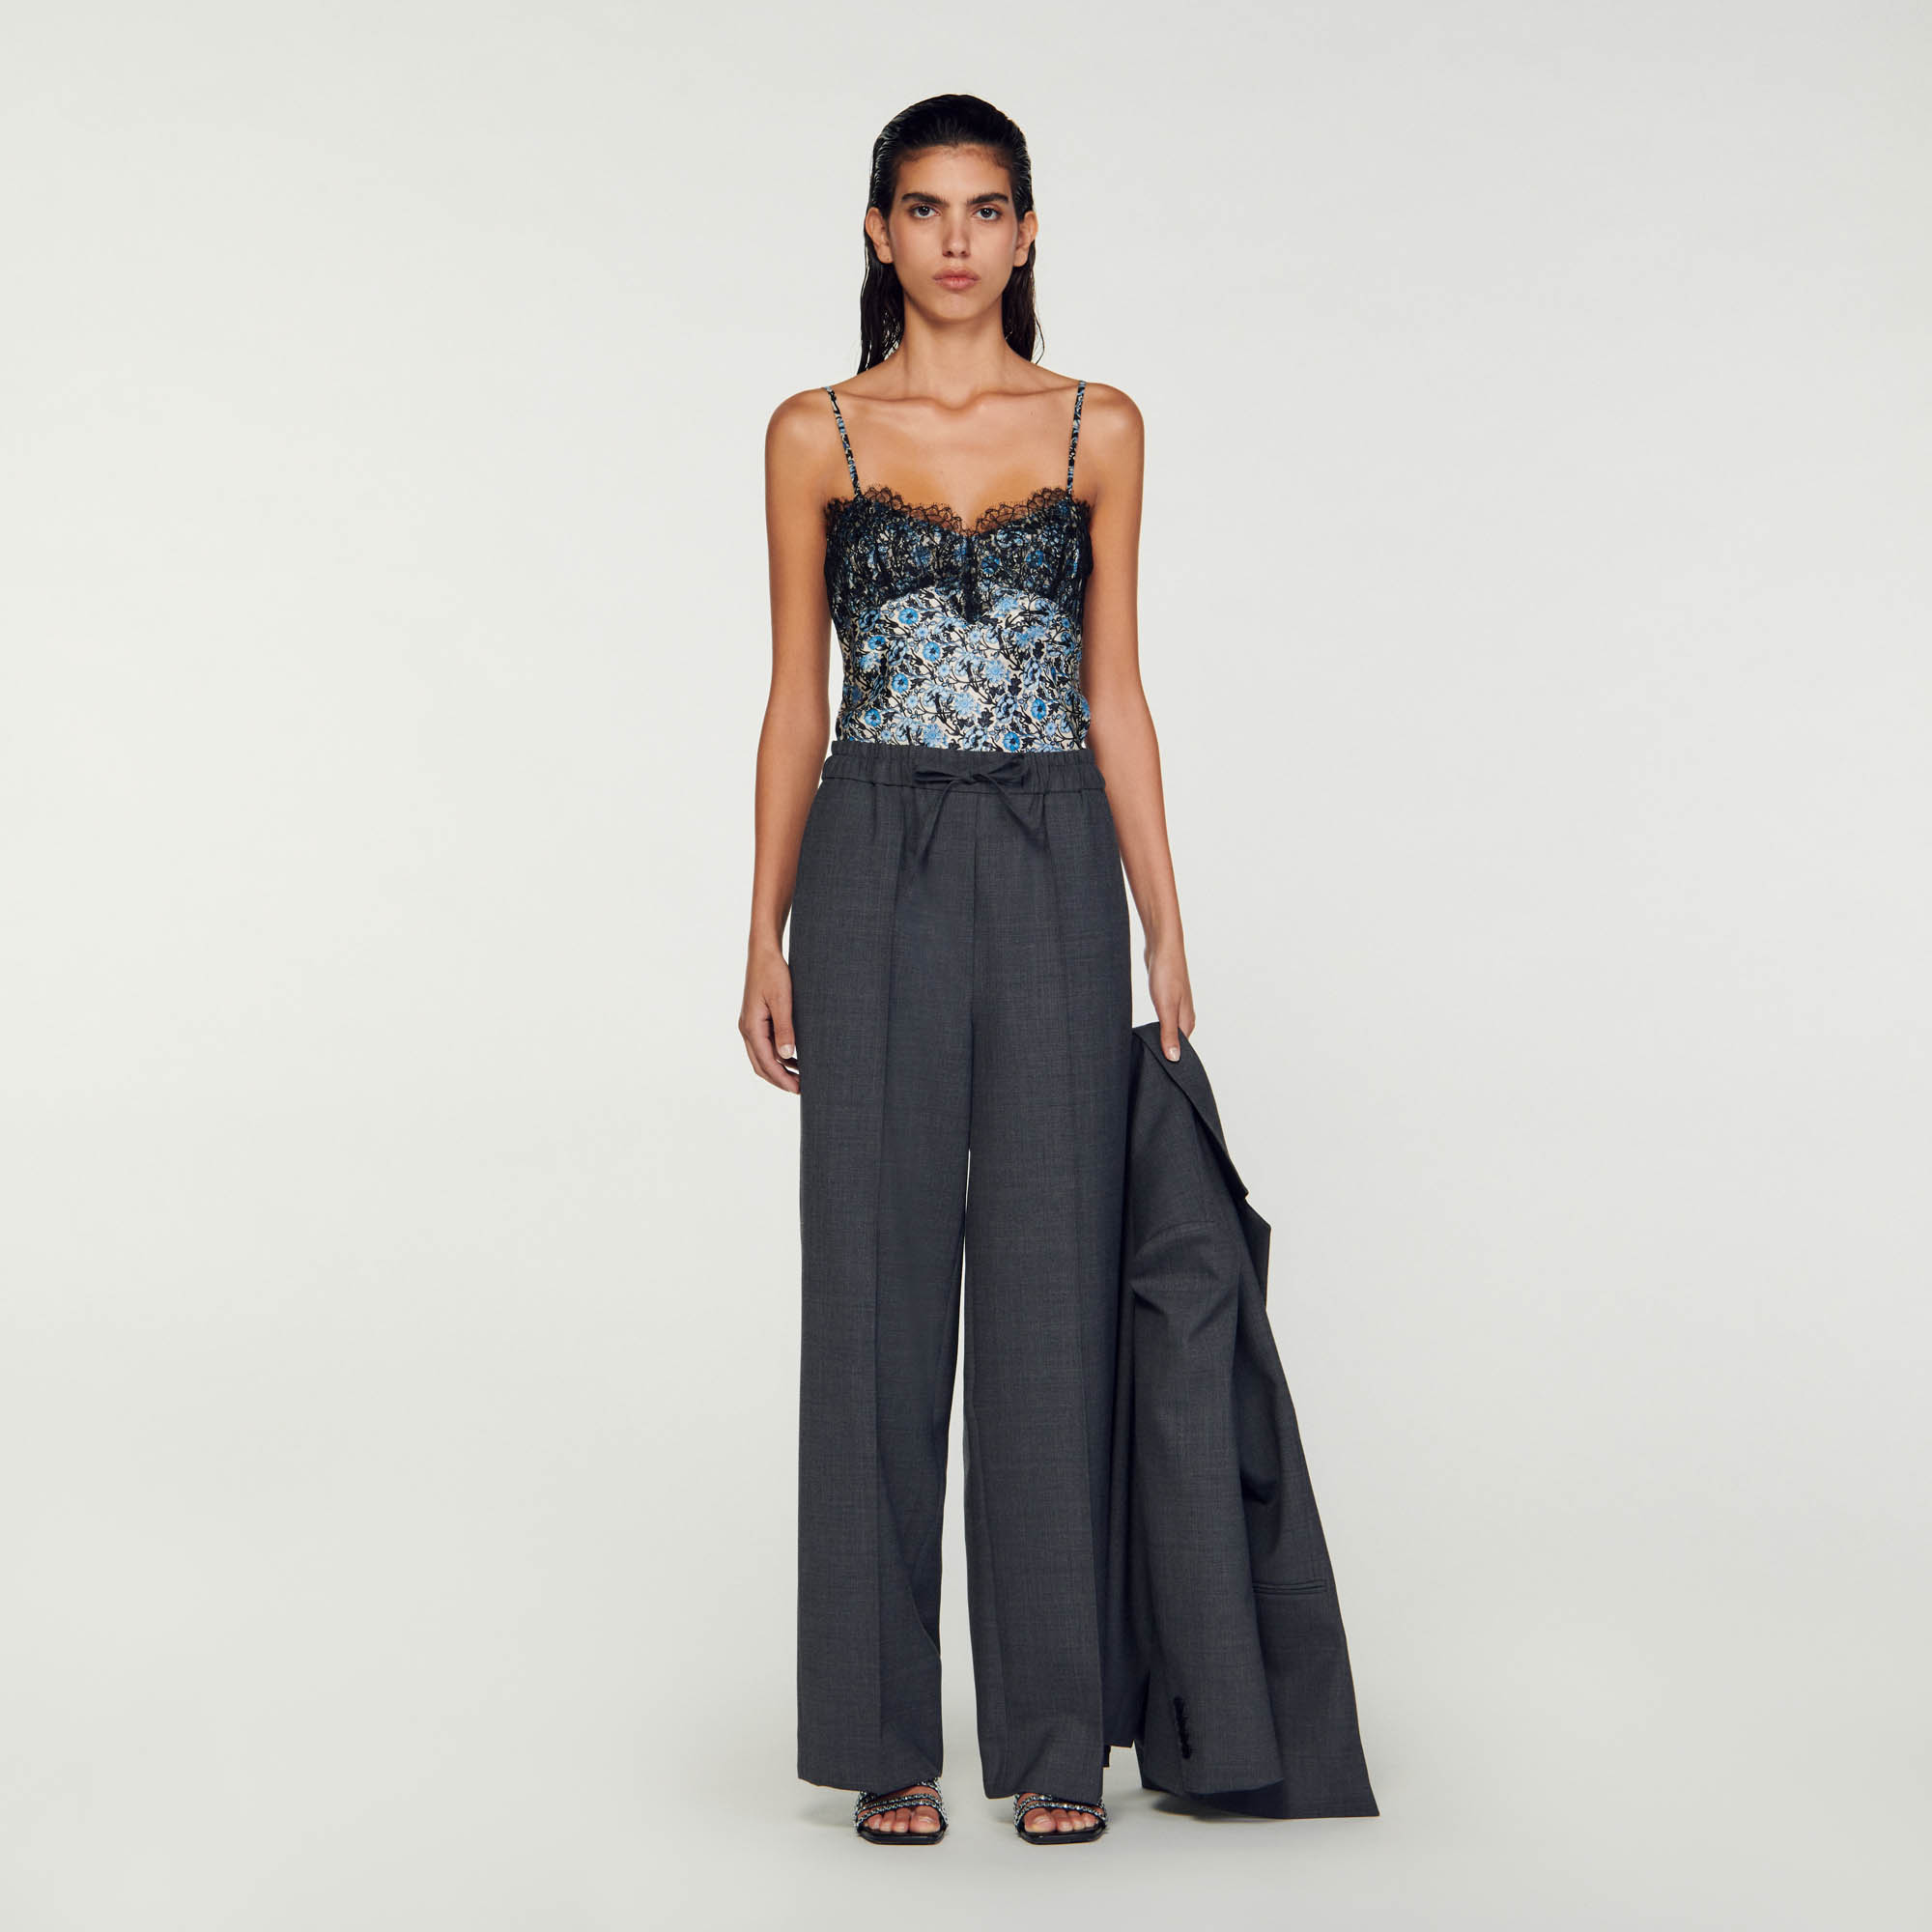 Sandro viscose Lace: Printed flowing camisole with thin straps and a contrasting lace neckline